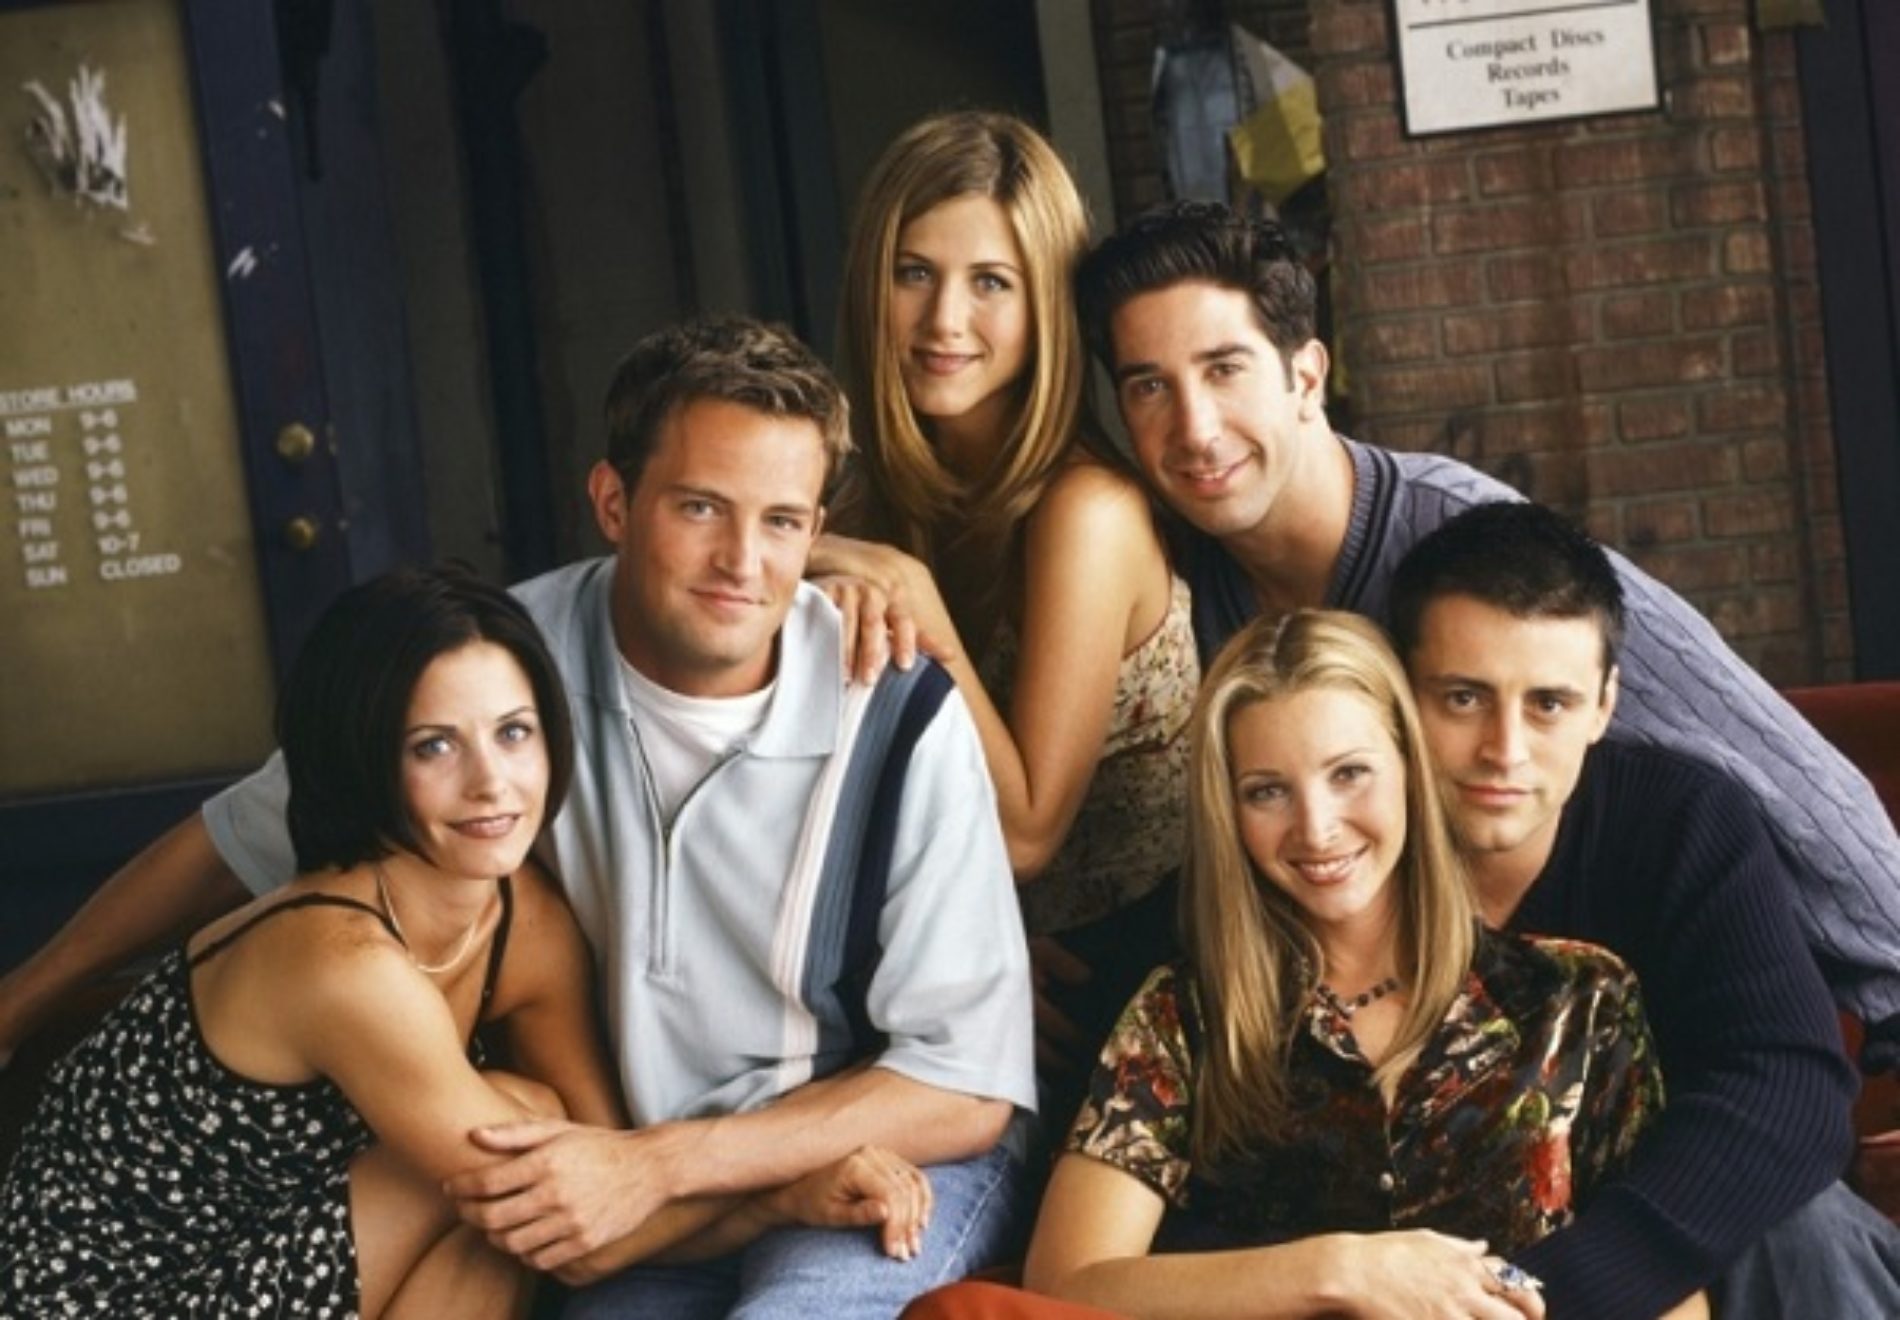 Sitcom ‘Friends’ comes to Netflix and viewers are shocked at the show’s homophobia, transphobia and misogyny